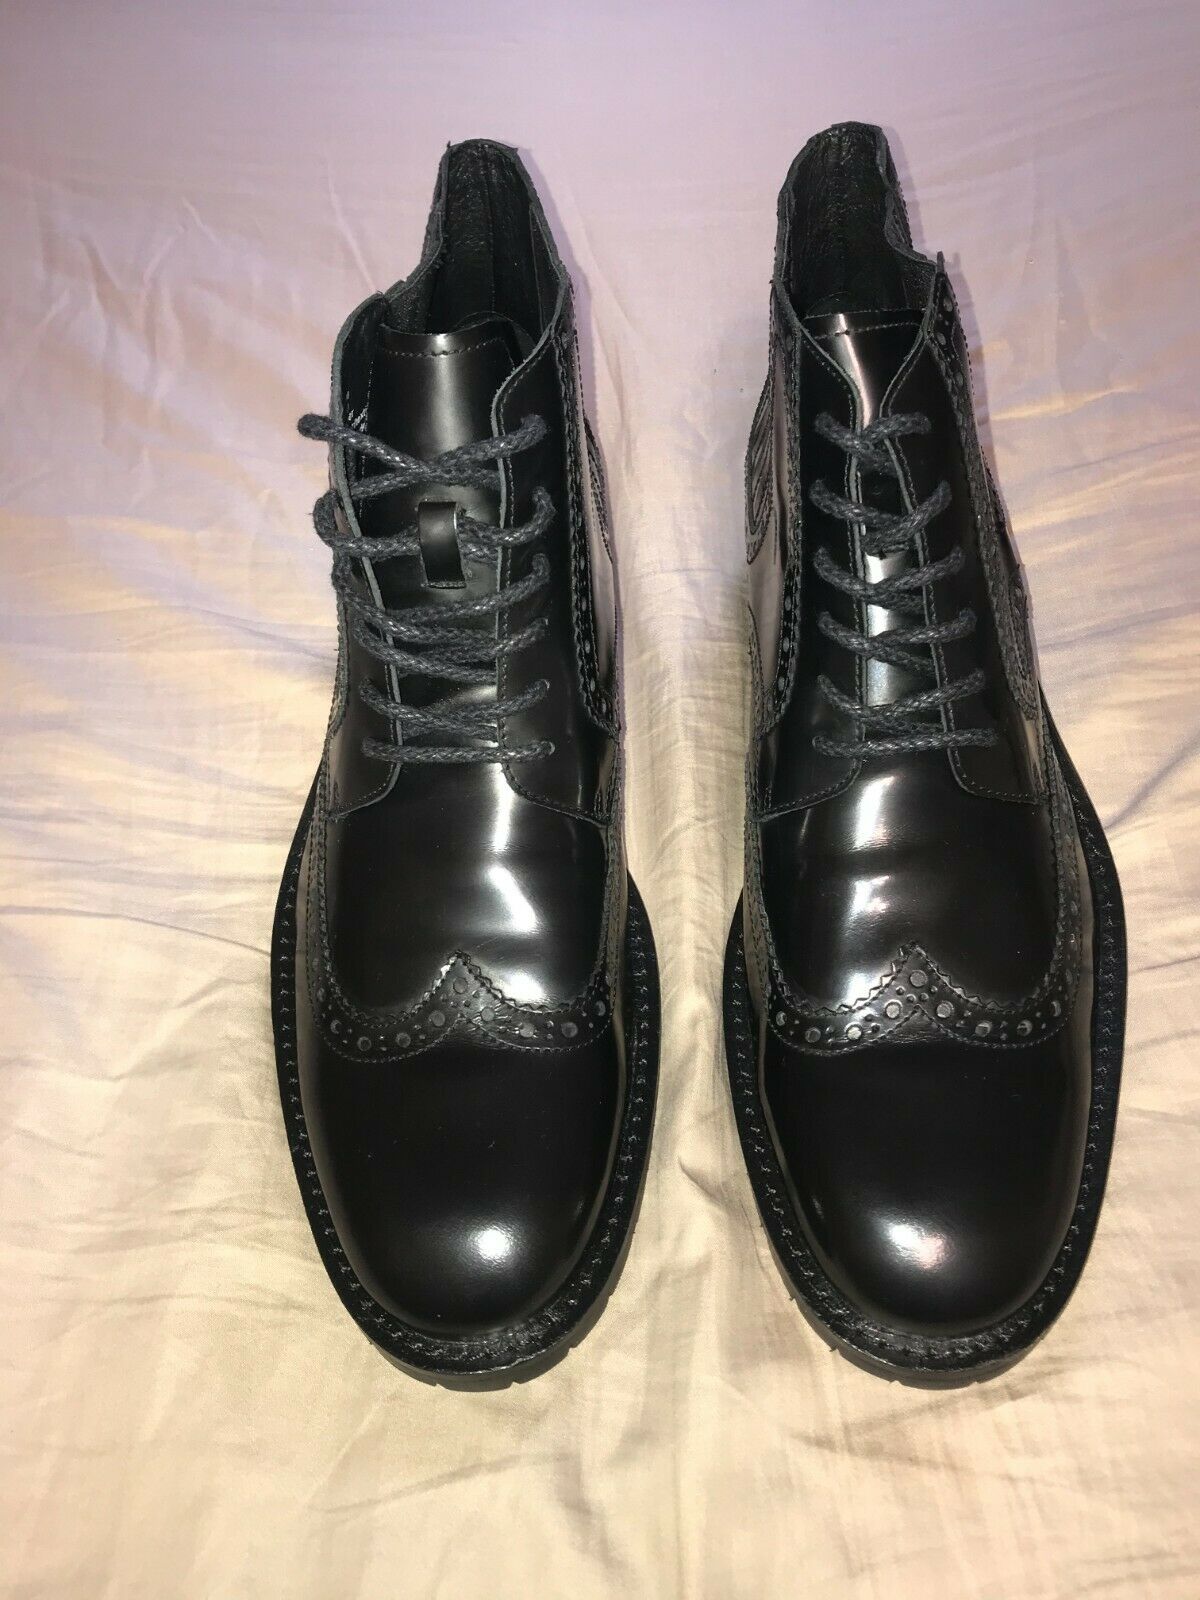 Kenneth Cole Men's Shoes / Boots Size 12M Mid-High Black Wingtip Leather NEW